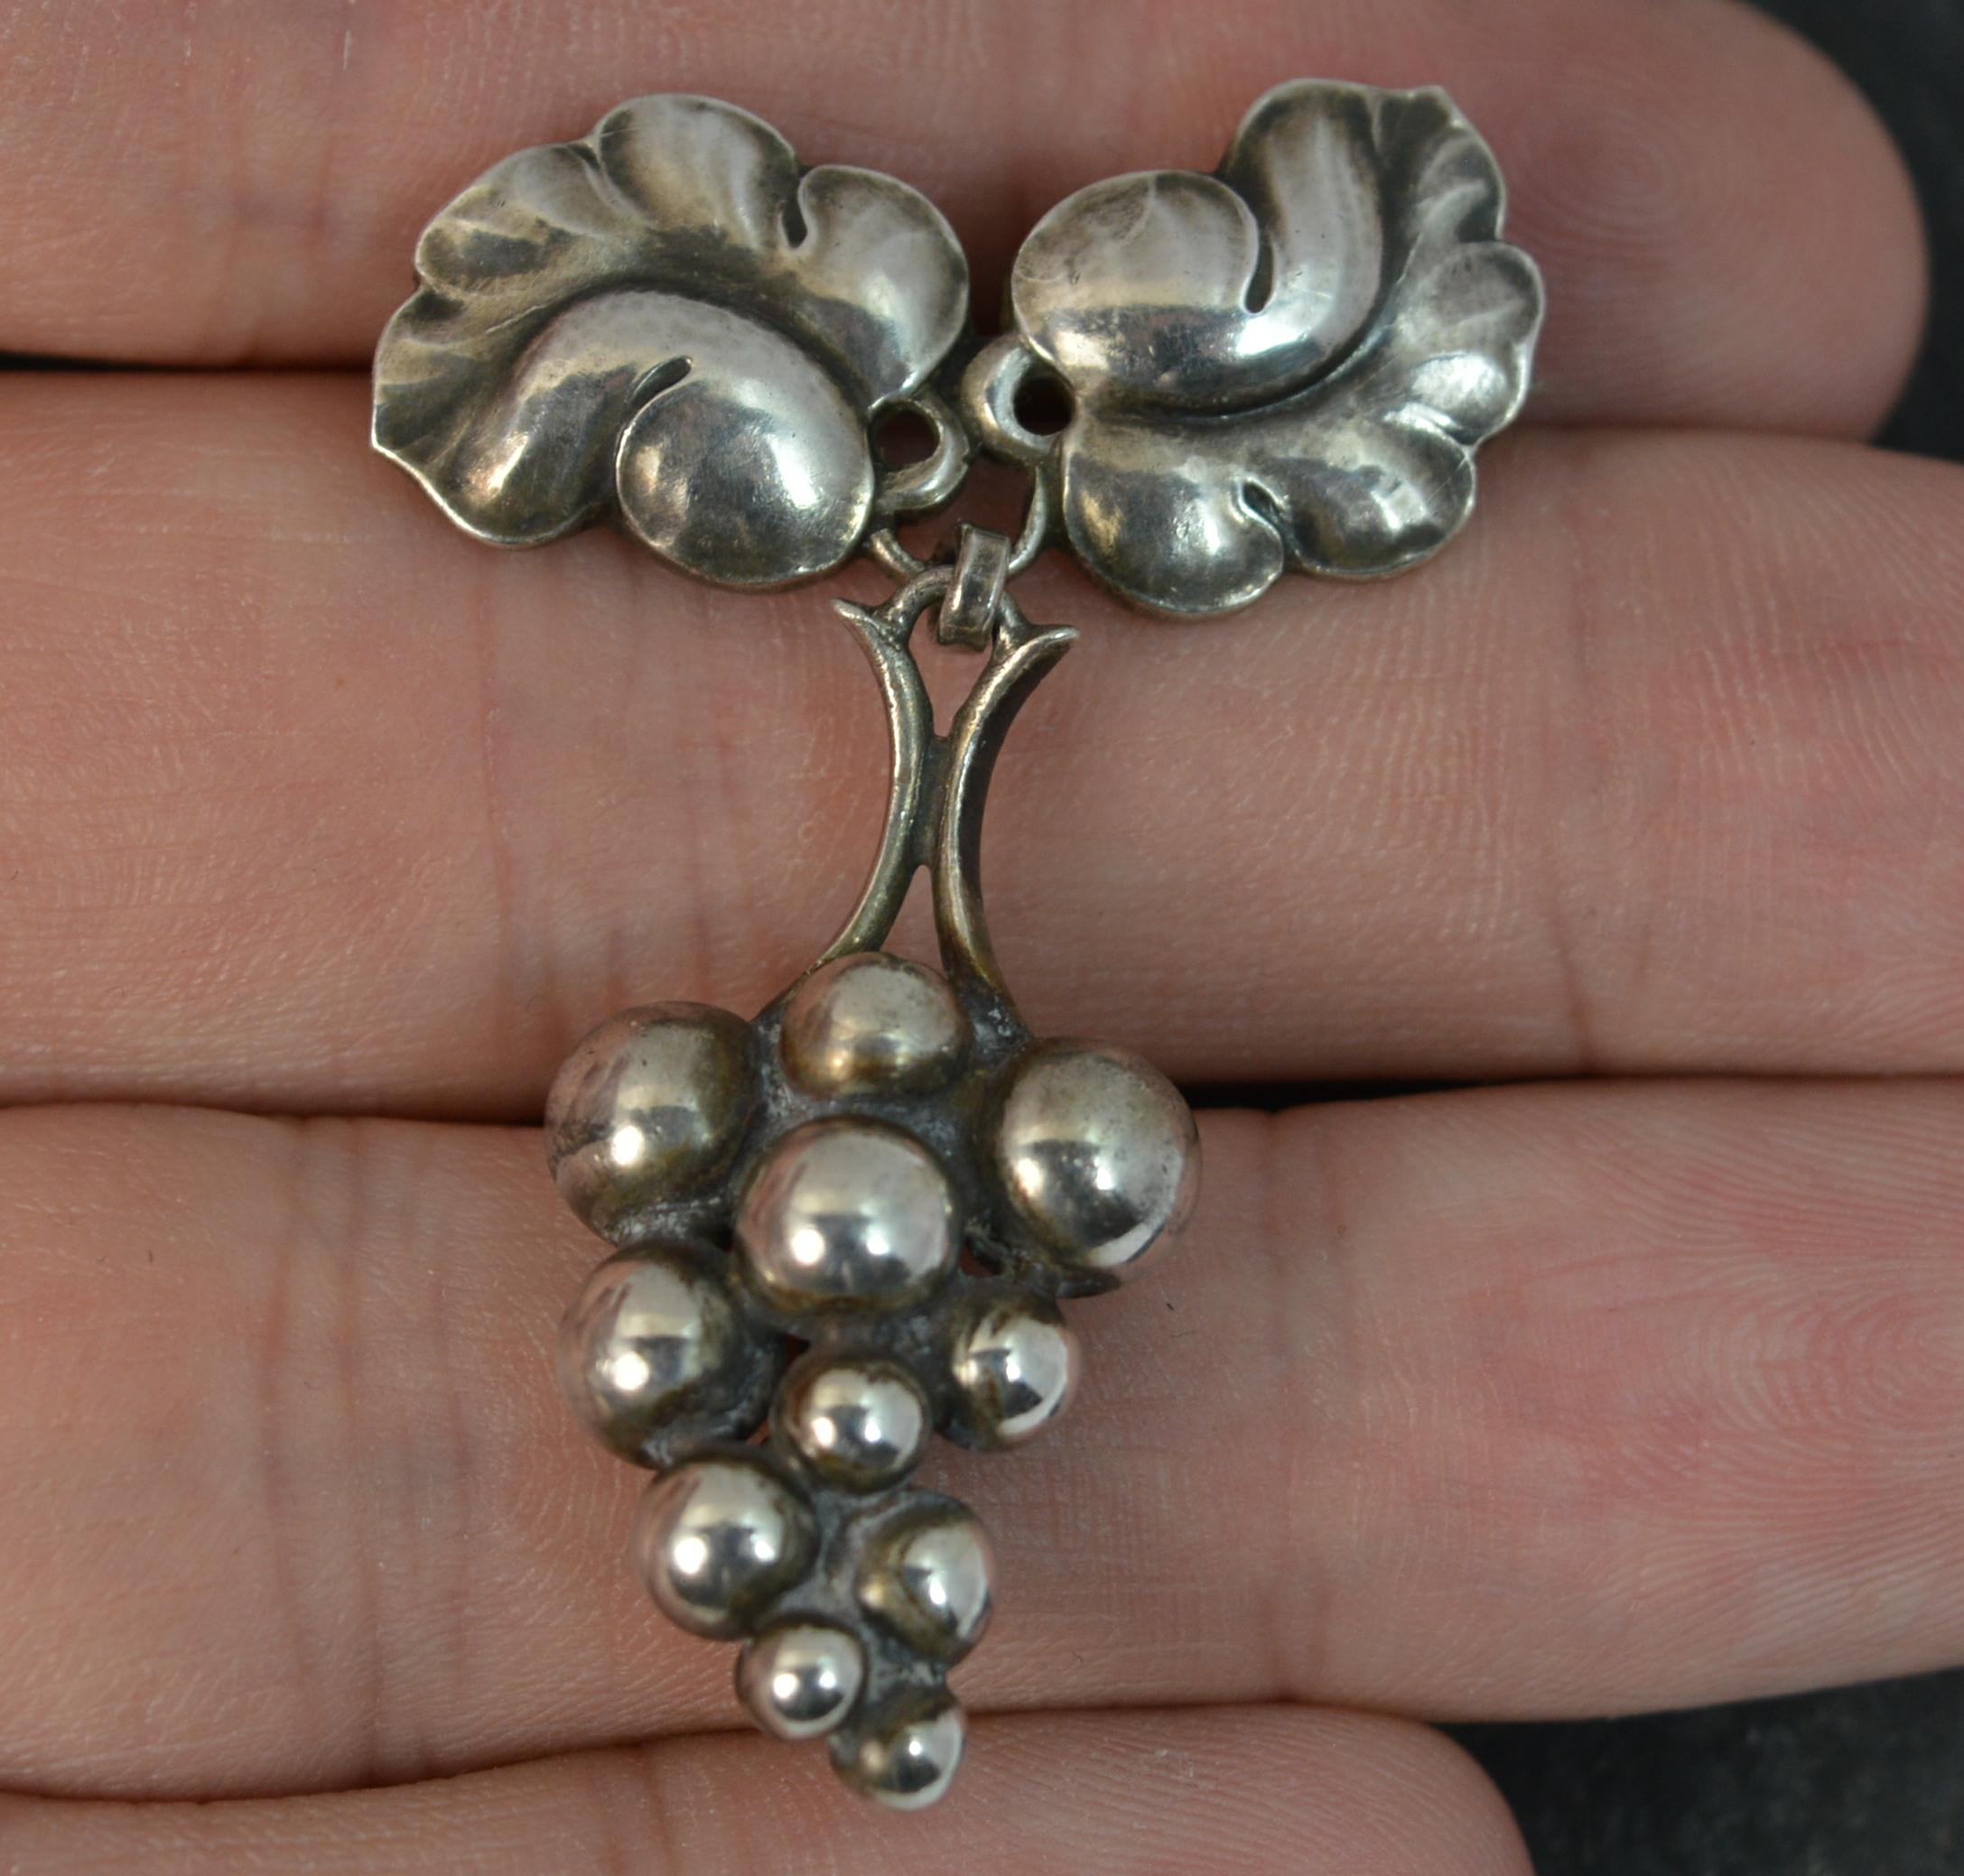 A very rare vintage Georg Jensen Sterling Silver pin brooch.

Solid silver, 217a model number. Beautiful grape drop design.

Moonlight Grape piece.

Hallmarks ; Georg Jensen, 925s Denmark, 217a
Weight ; 6.8 grams
Size ; 28mm x 43mm approx
Condition